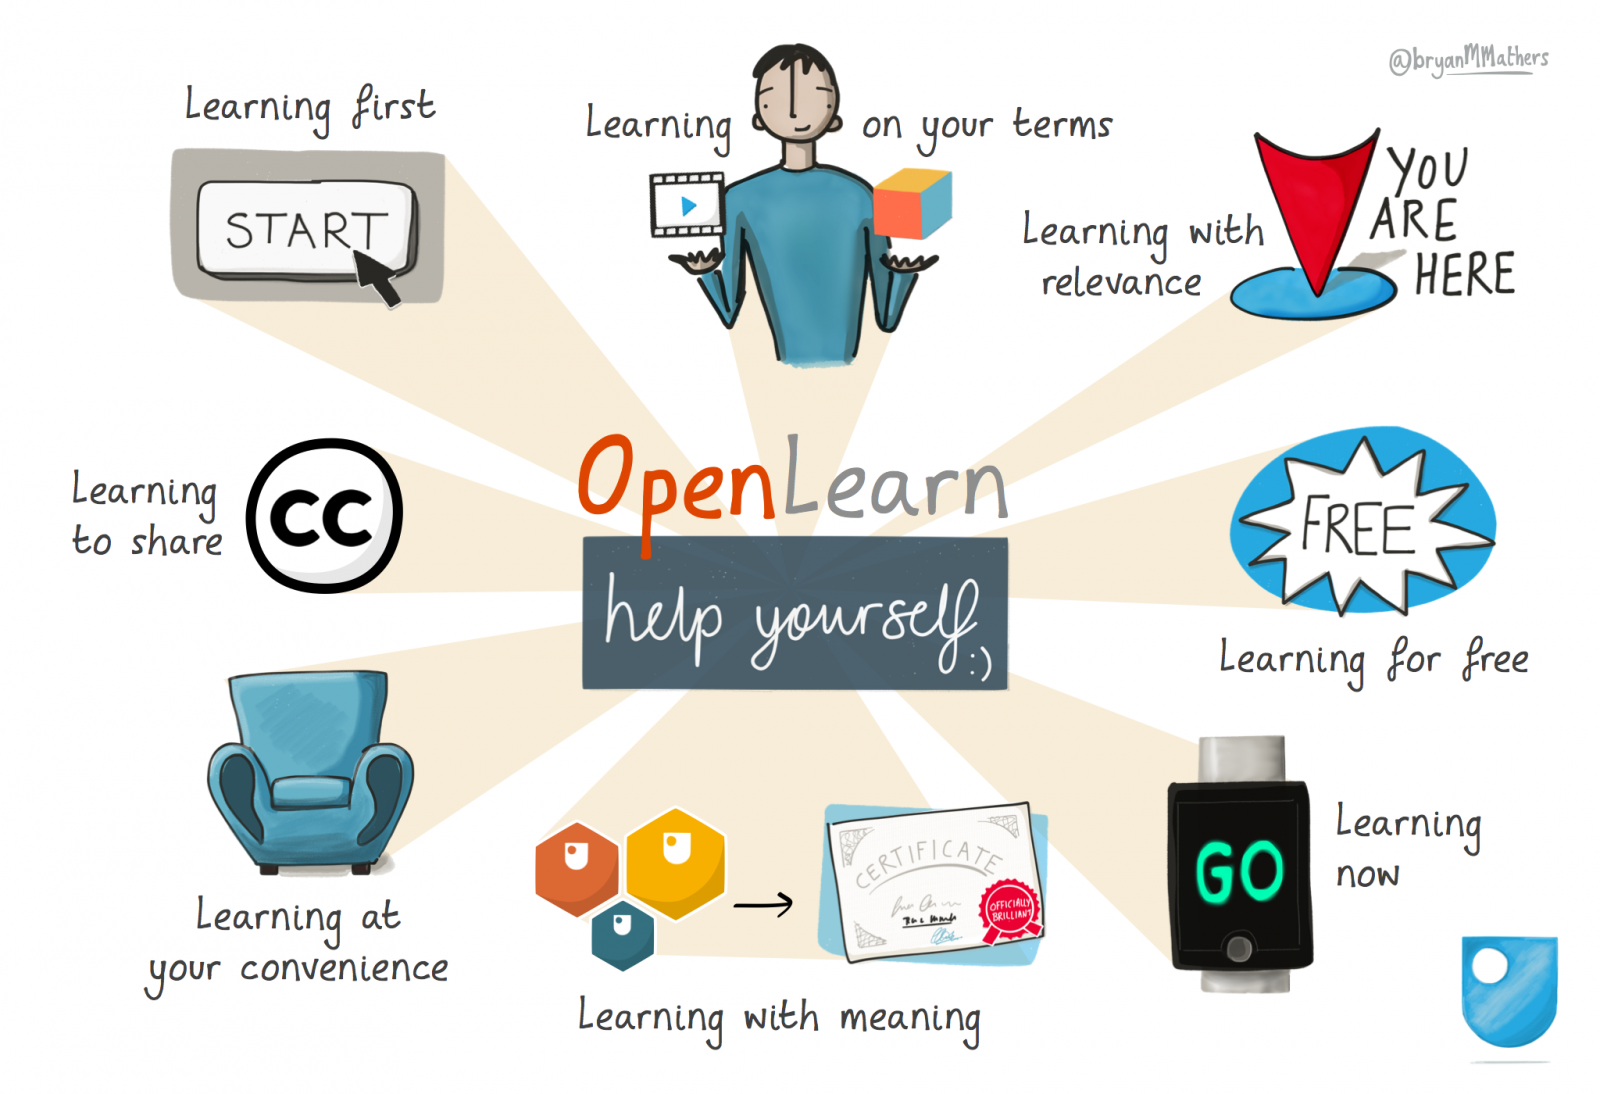 OpenLearn allows you to learn for free, at any time.